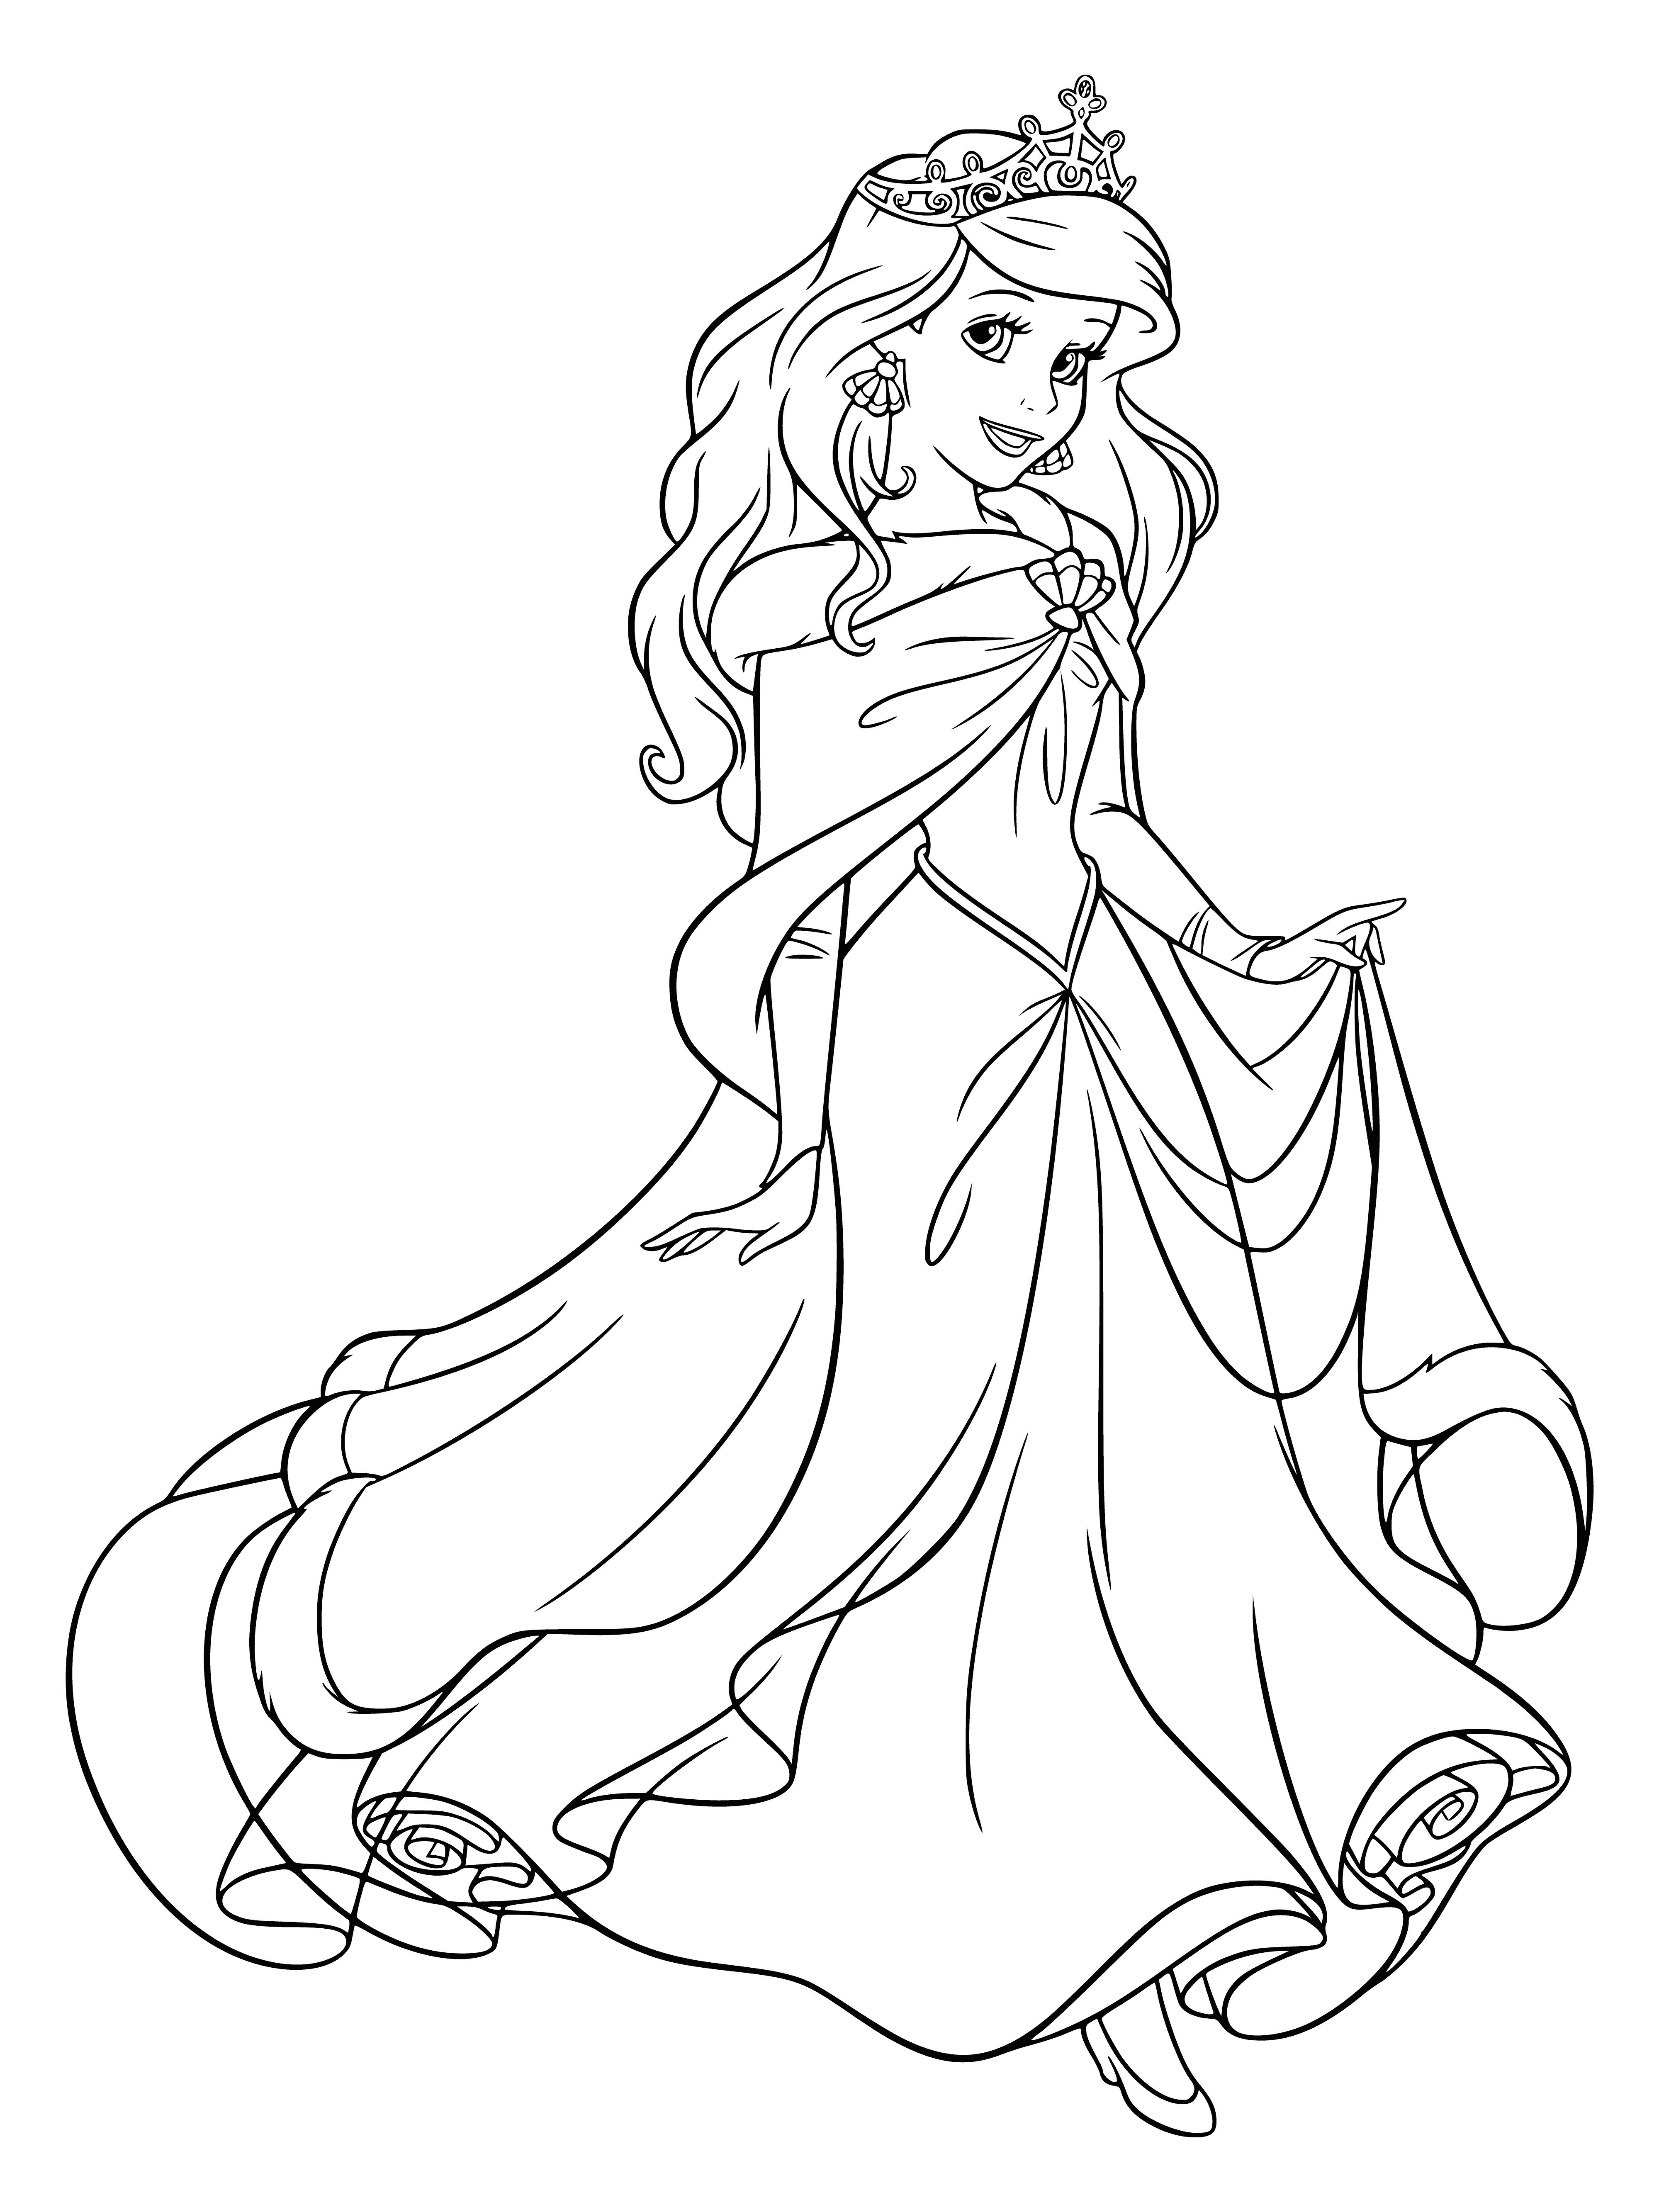 Ariel in a winter cloak coloring page